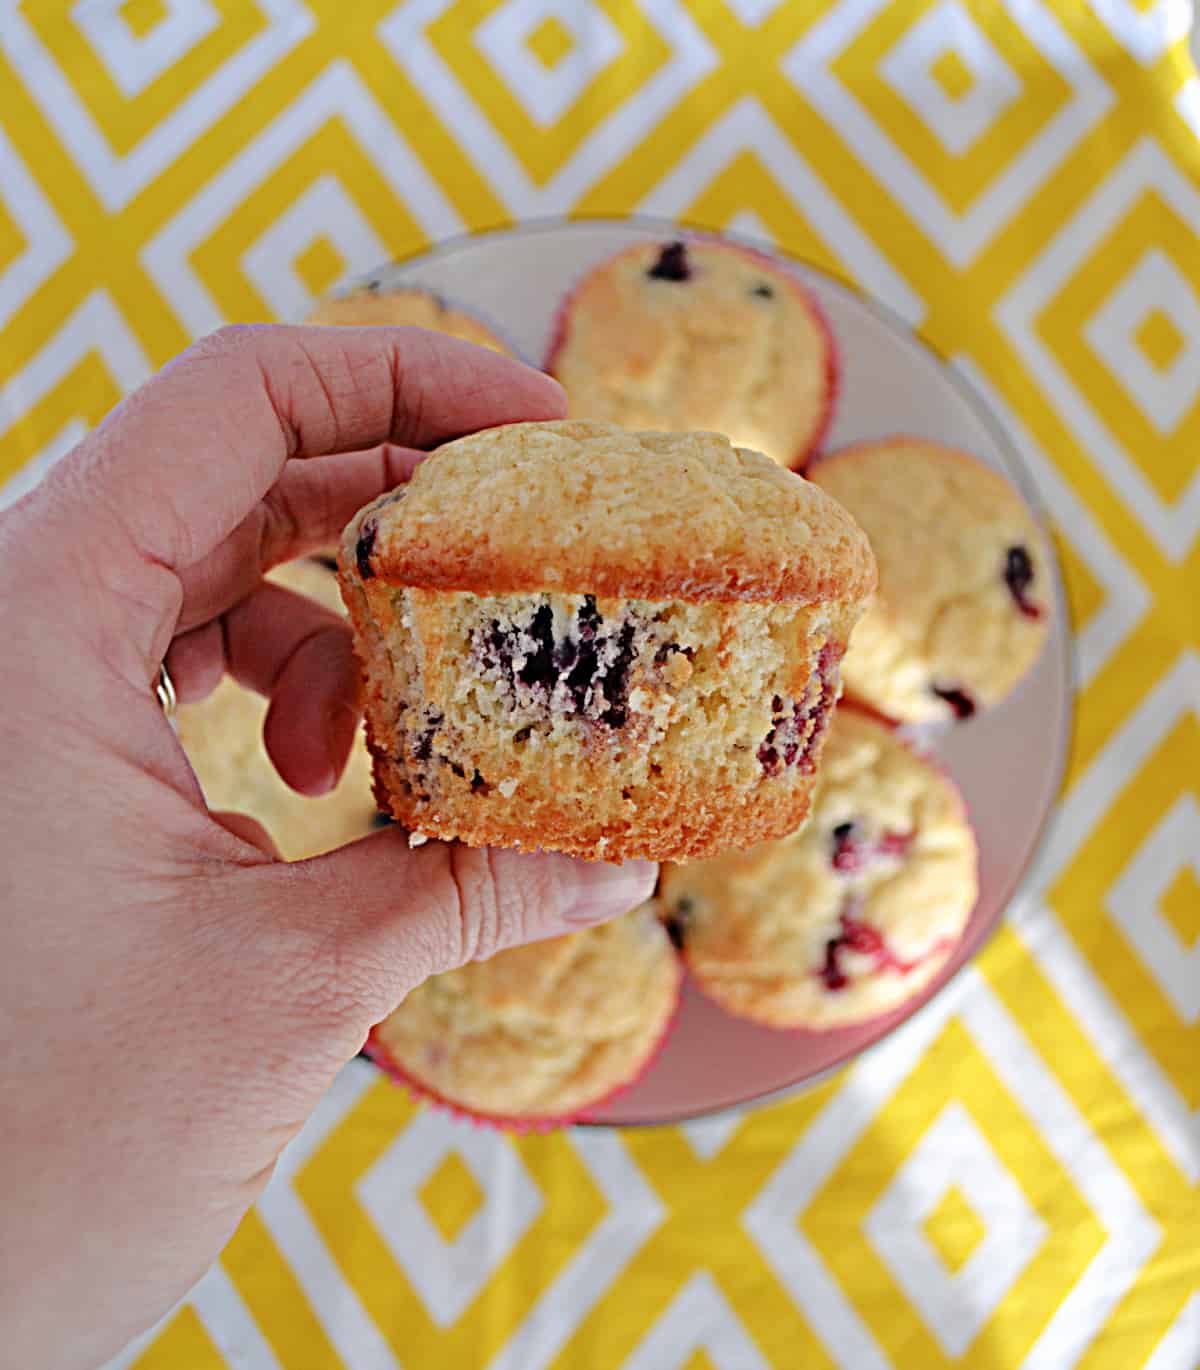 A hand holding a blueberry lemon muffin from the side.